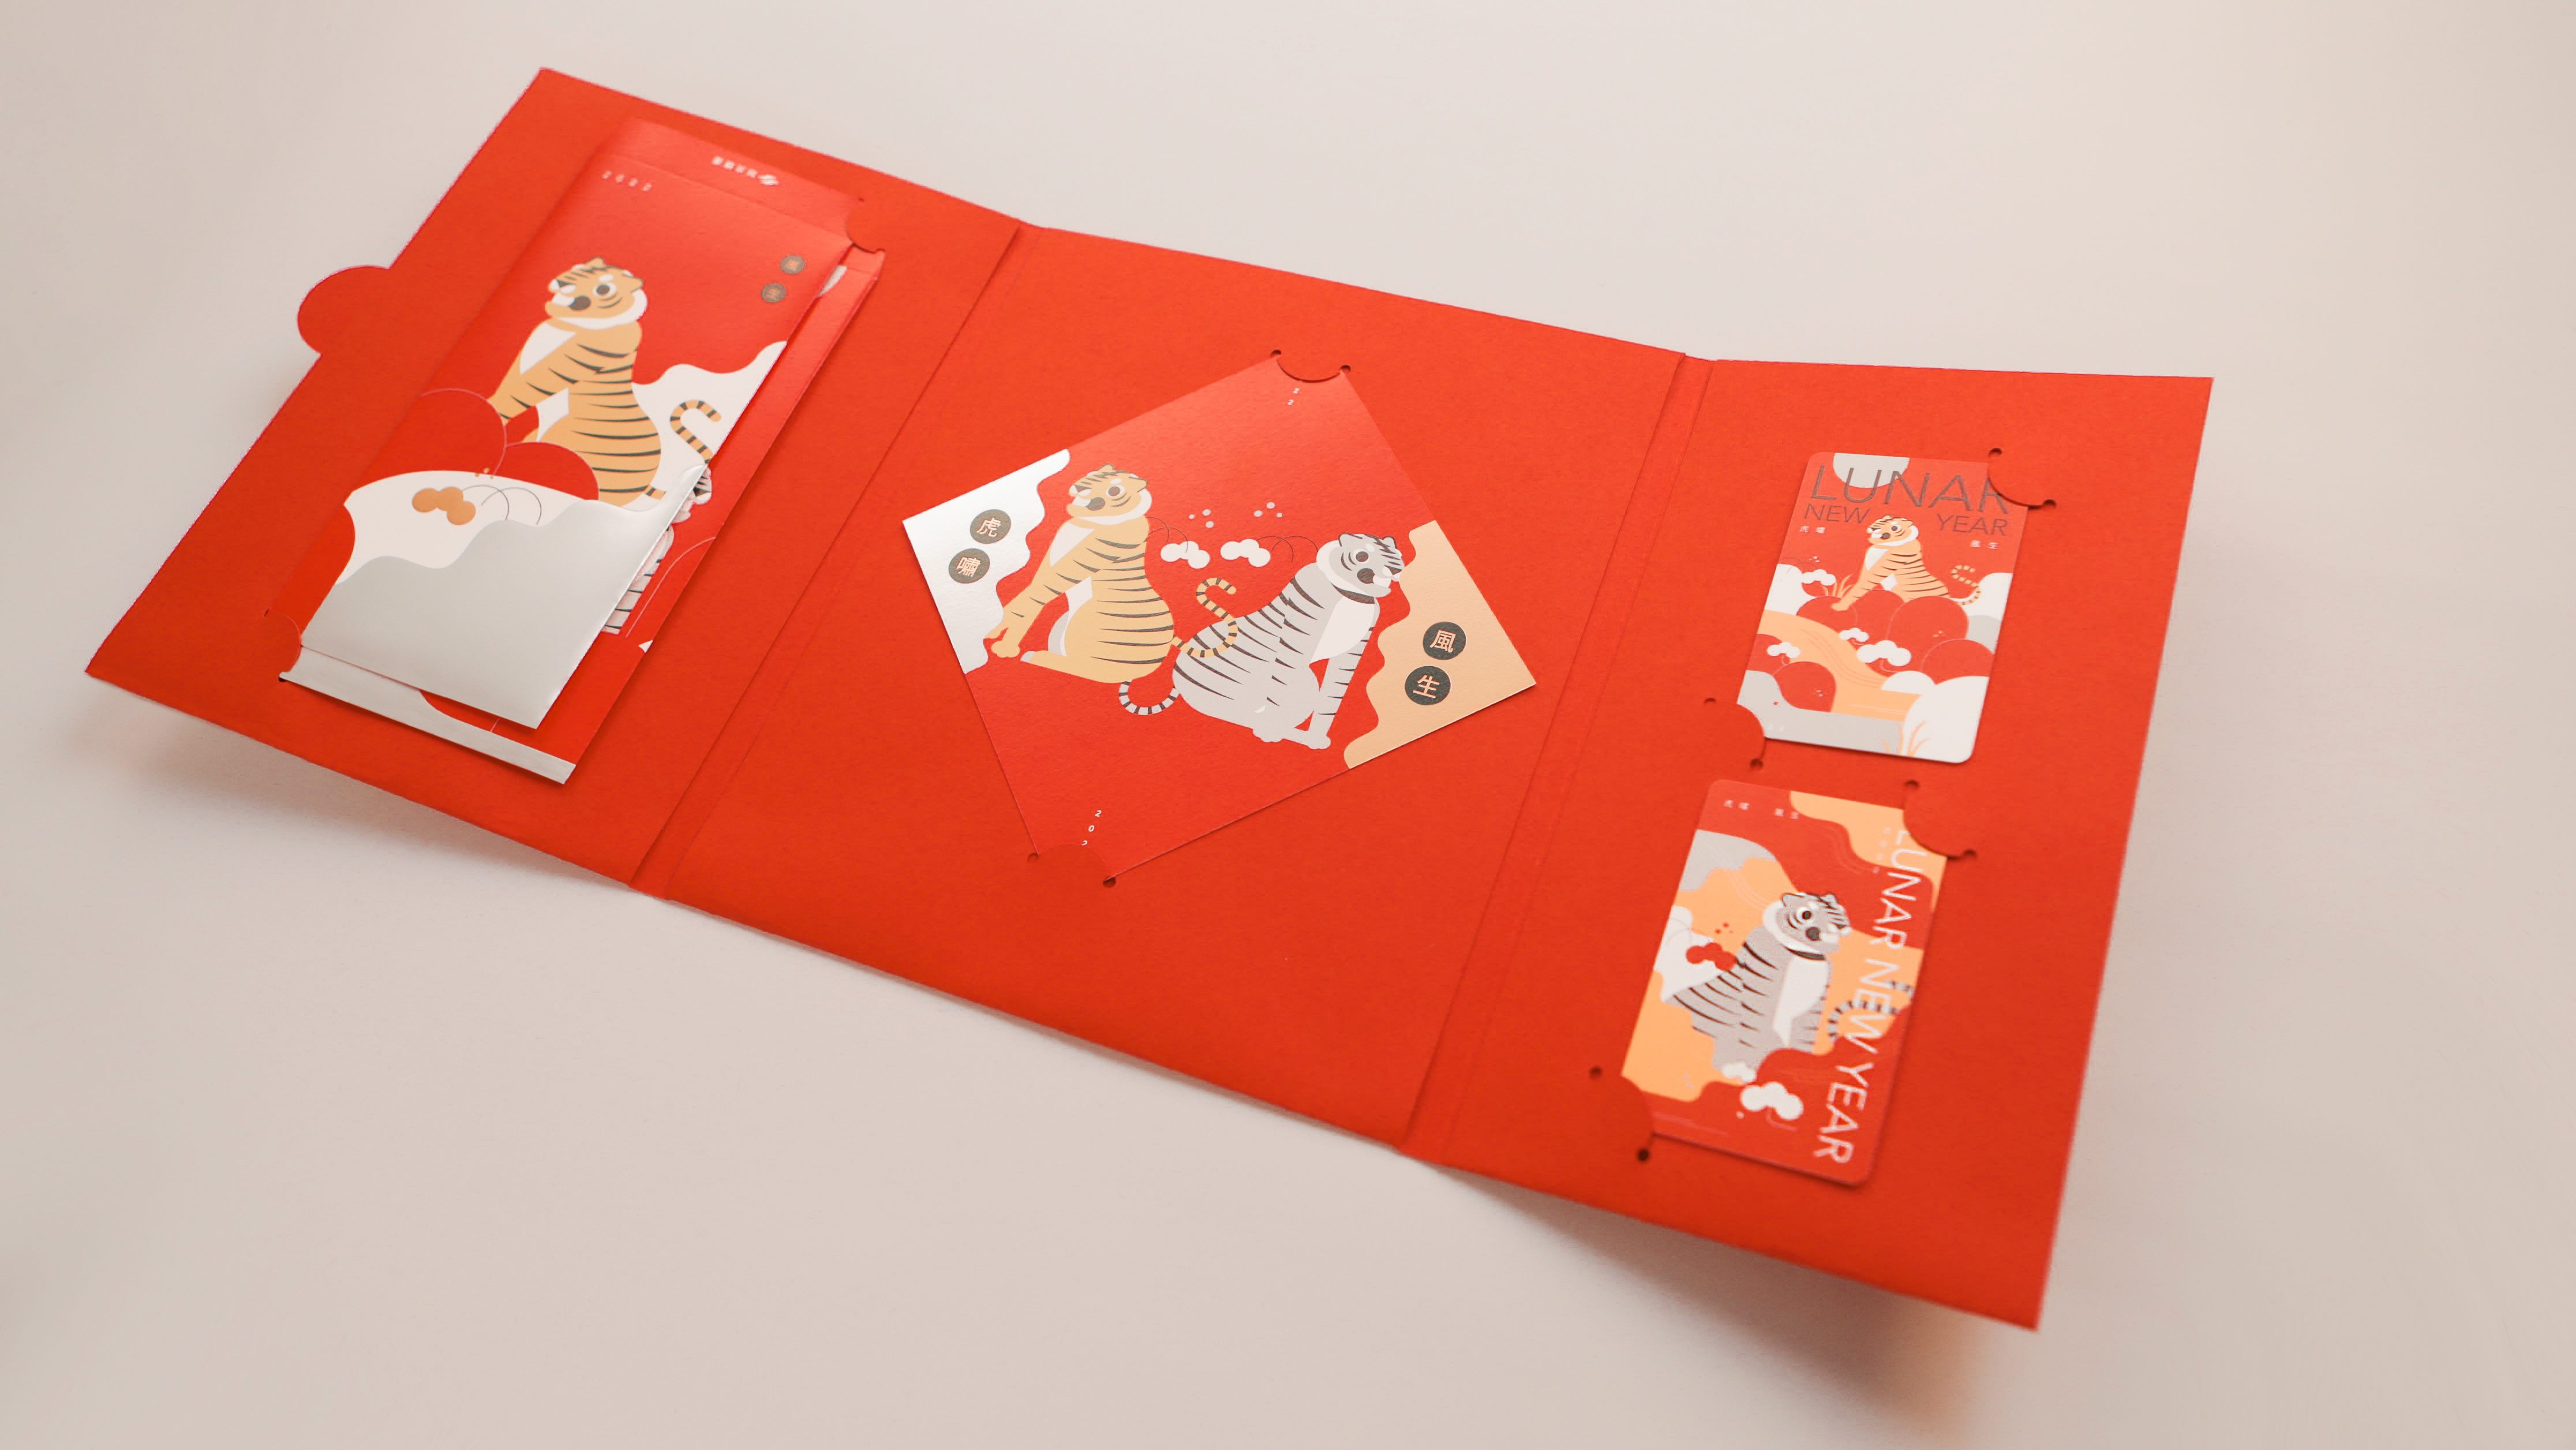 On January 15, these special cards will be available for purchase at booths at MRT Zhongshan Station and MRT Zhongxiao Fuxing Station. (Photo / Provided by the Taipei City Government)